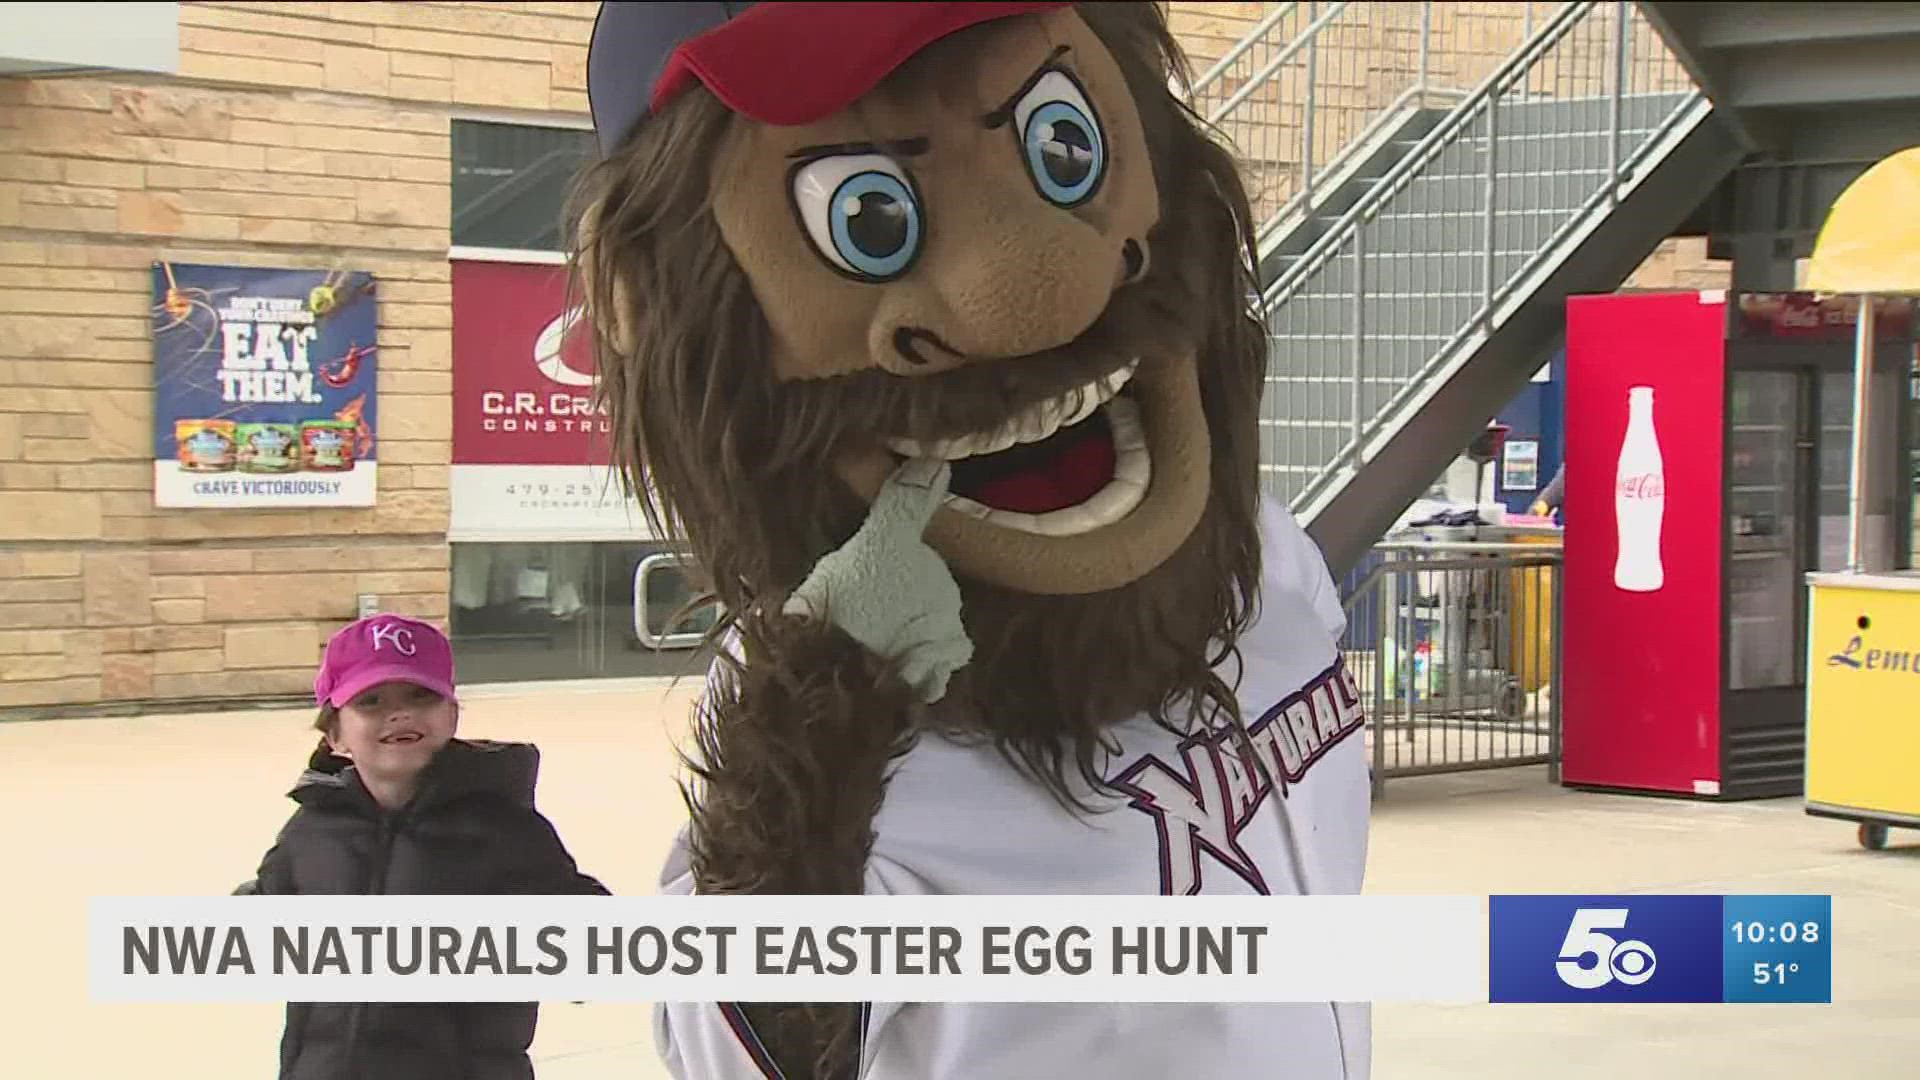 An Easter egg hunt was held after the Naturals’ game Sunday, April 17.